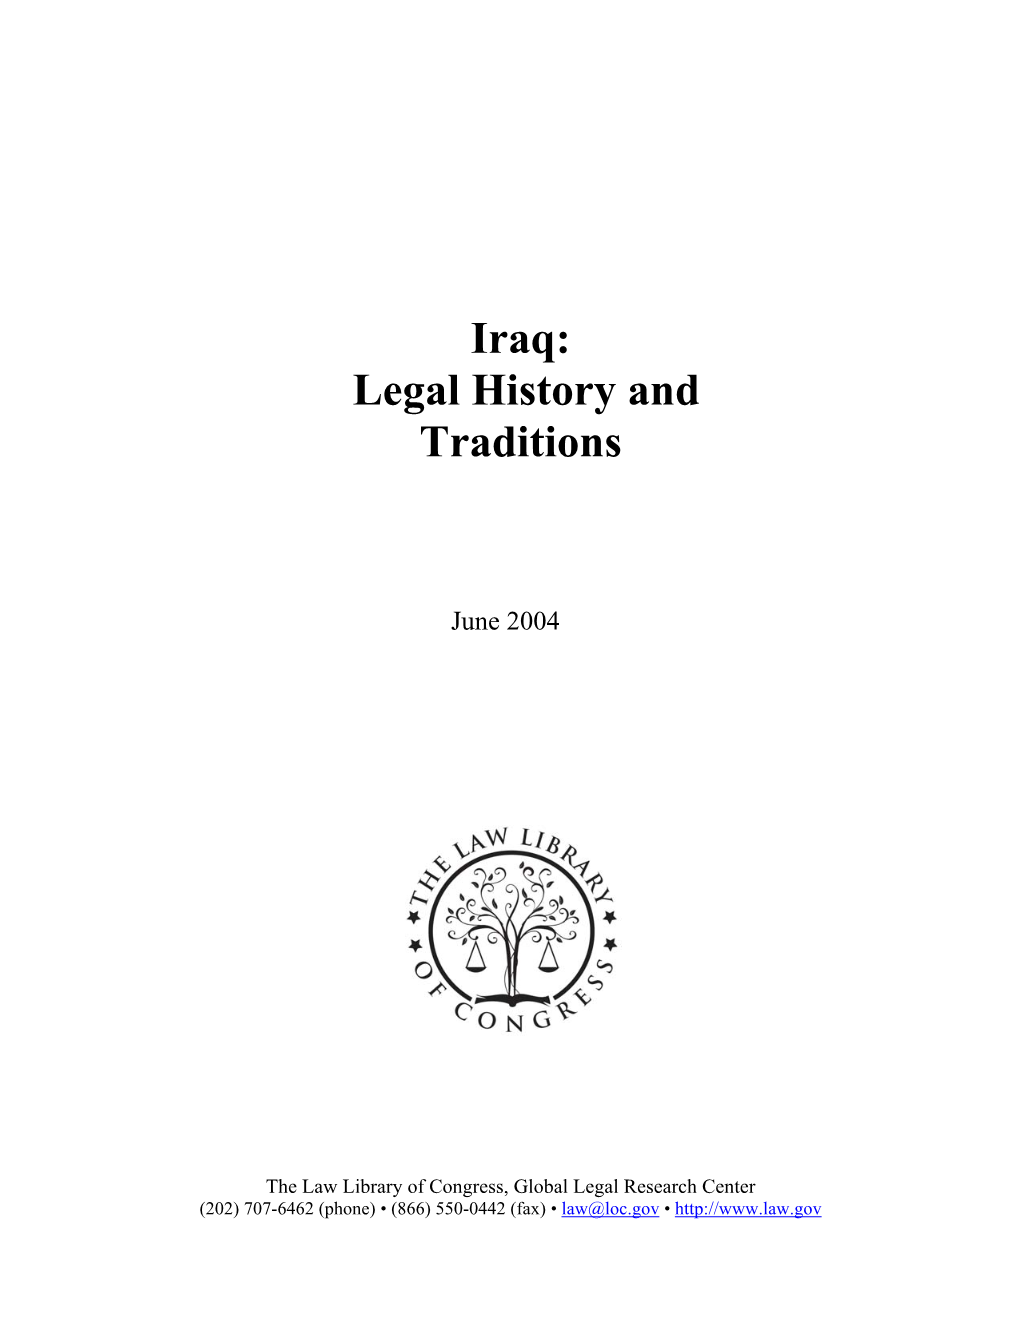 Iraq: Legal History and Traditions